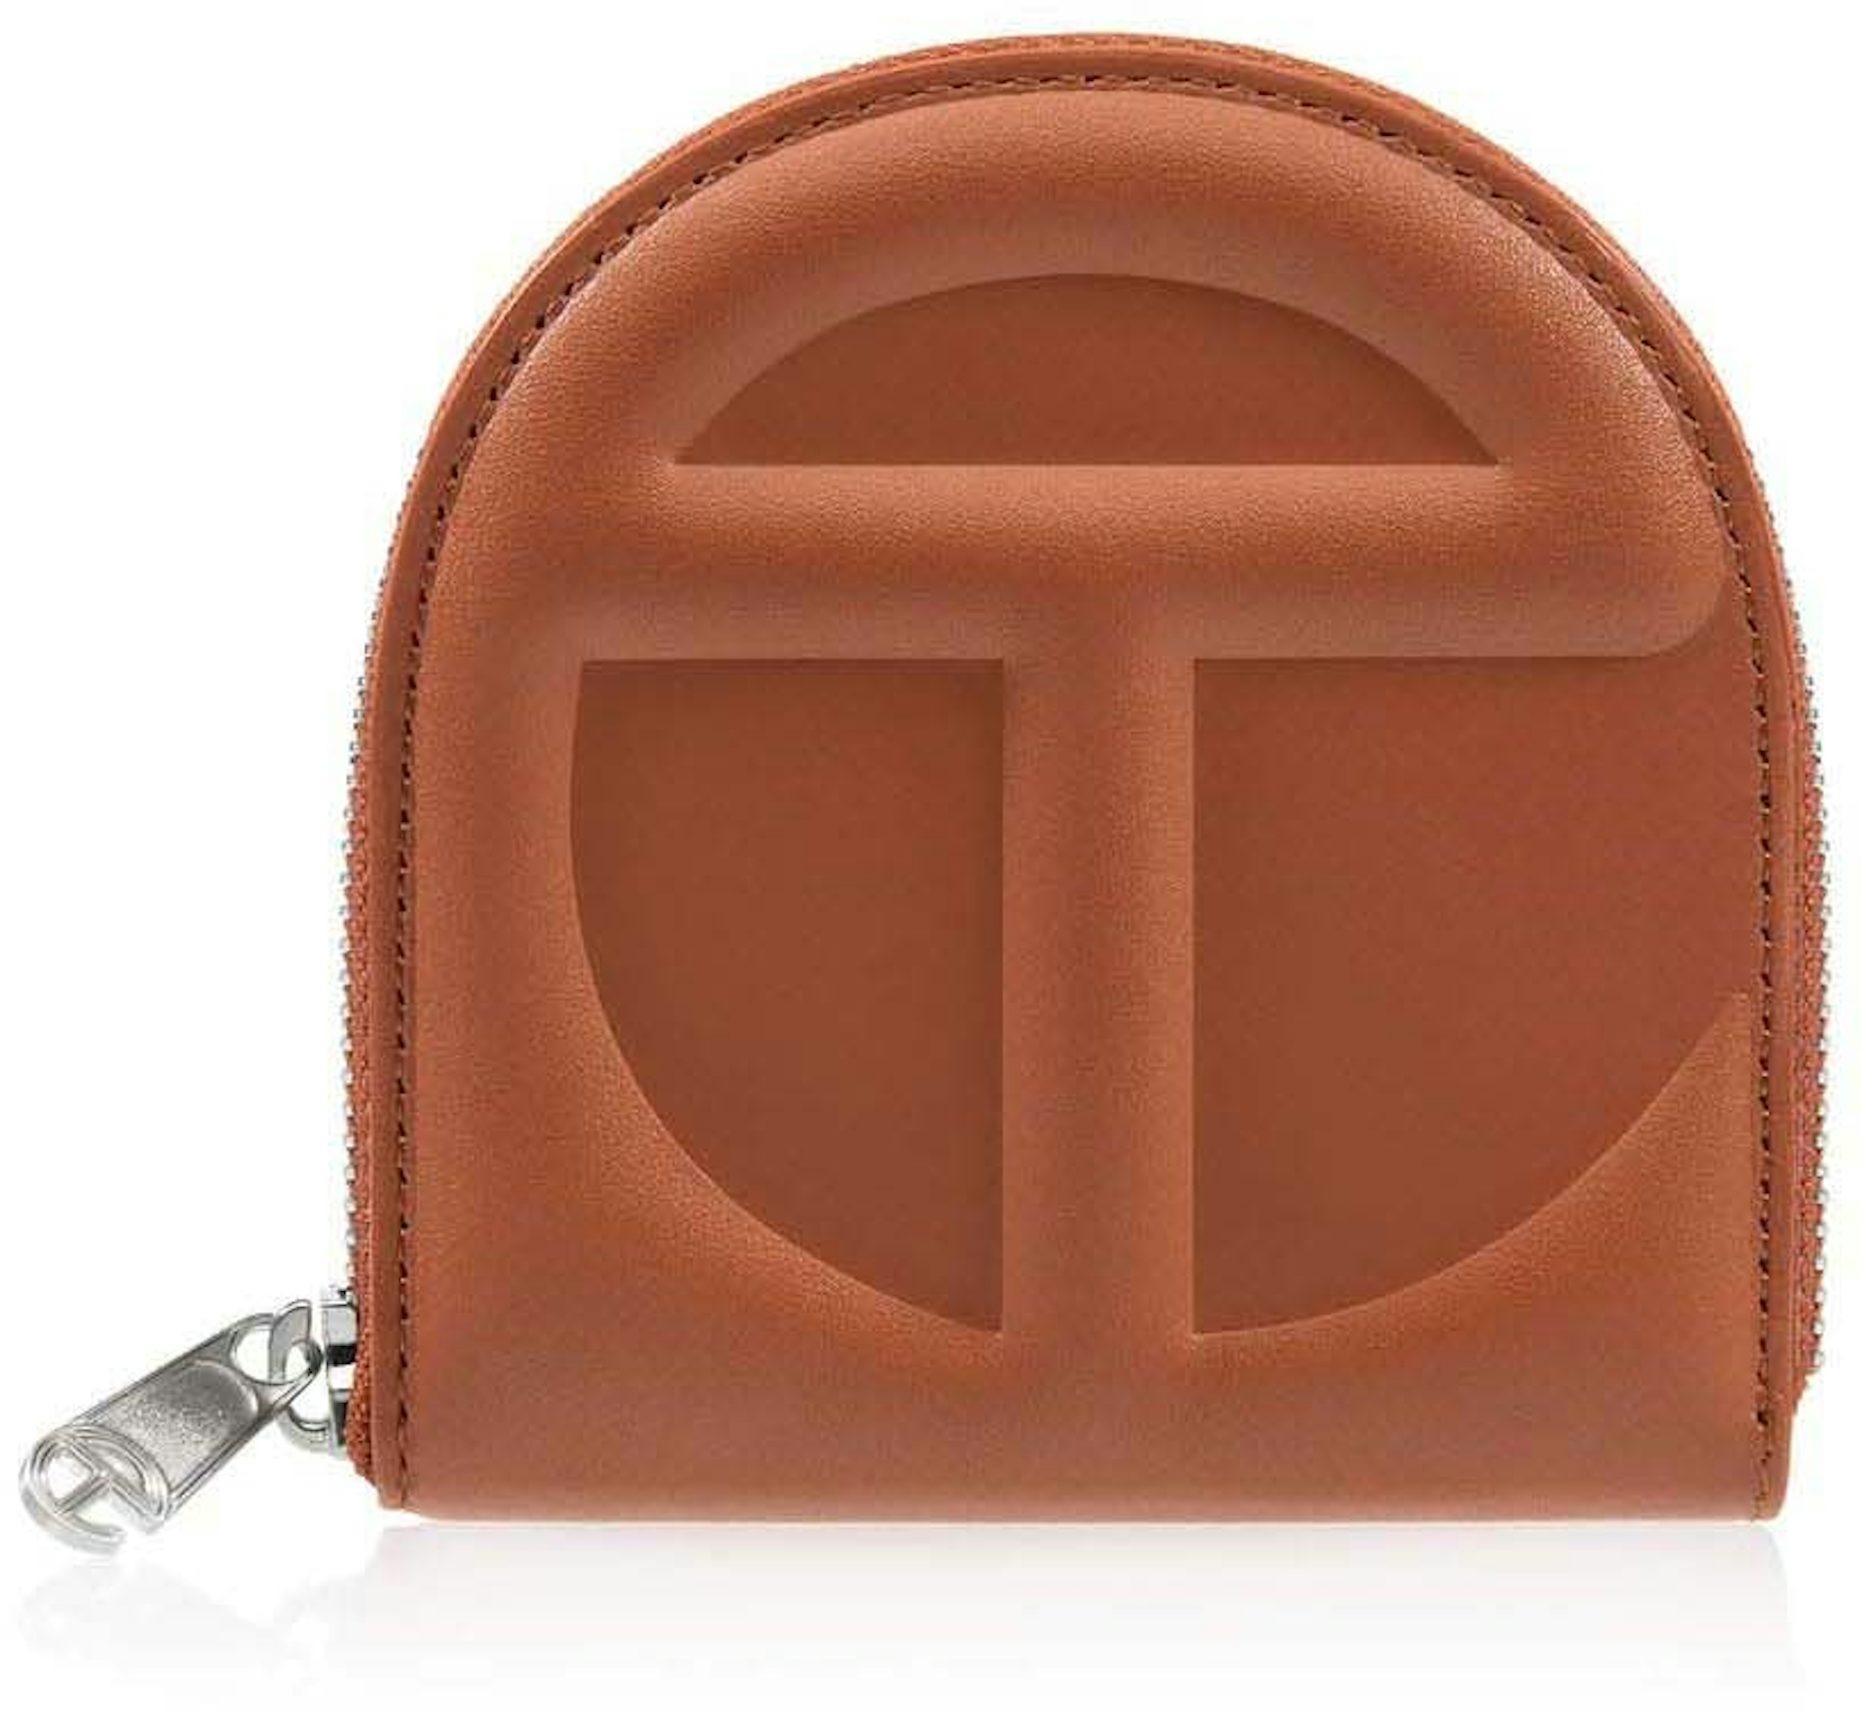 Tory Burch, Accessories, Tory Burch Mini Speedy Bag Keychain Pouch  Wzipper Pebble Leather With Gold